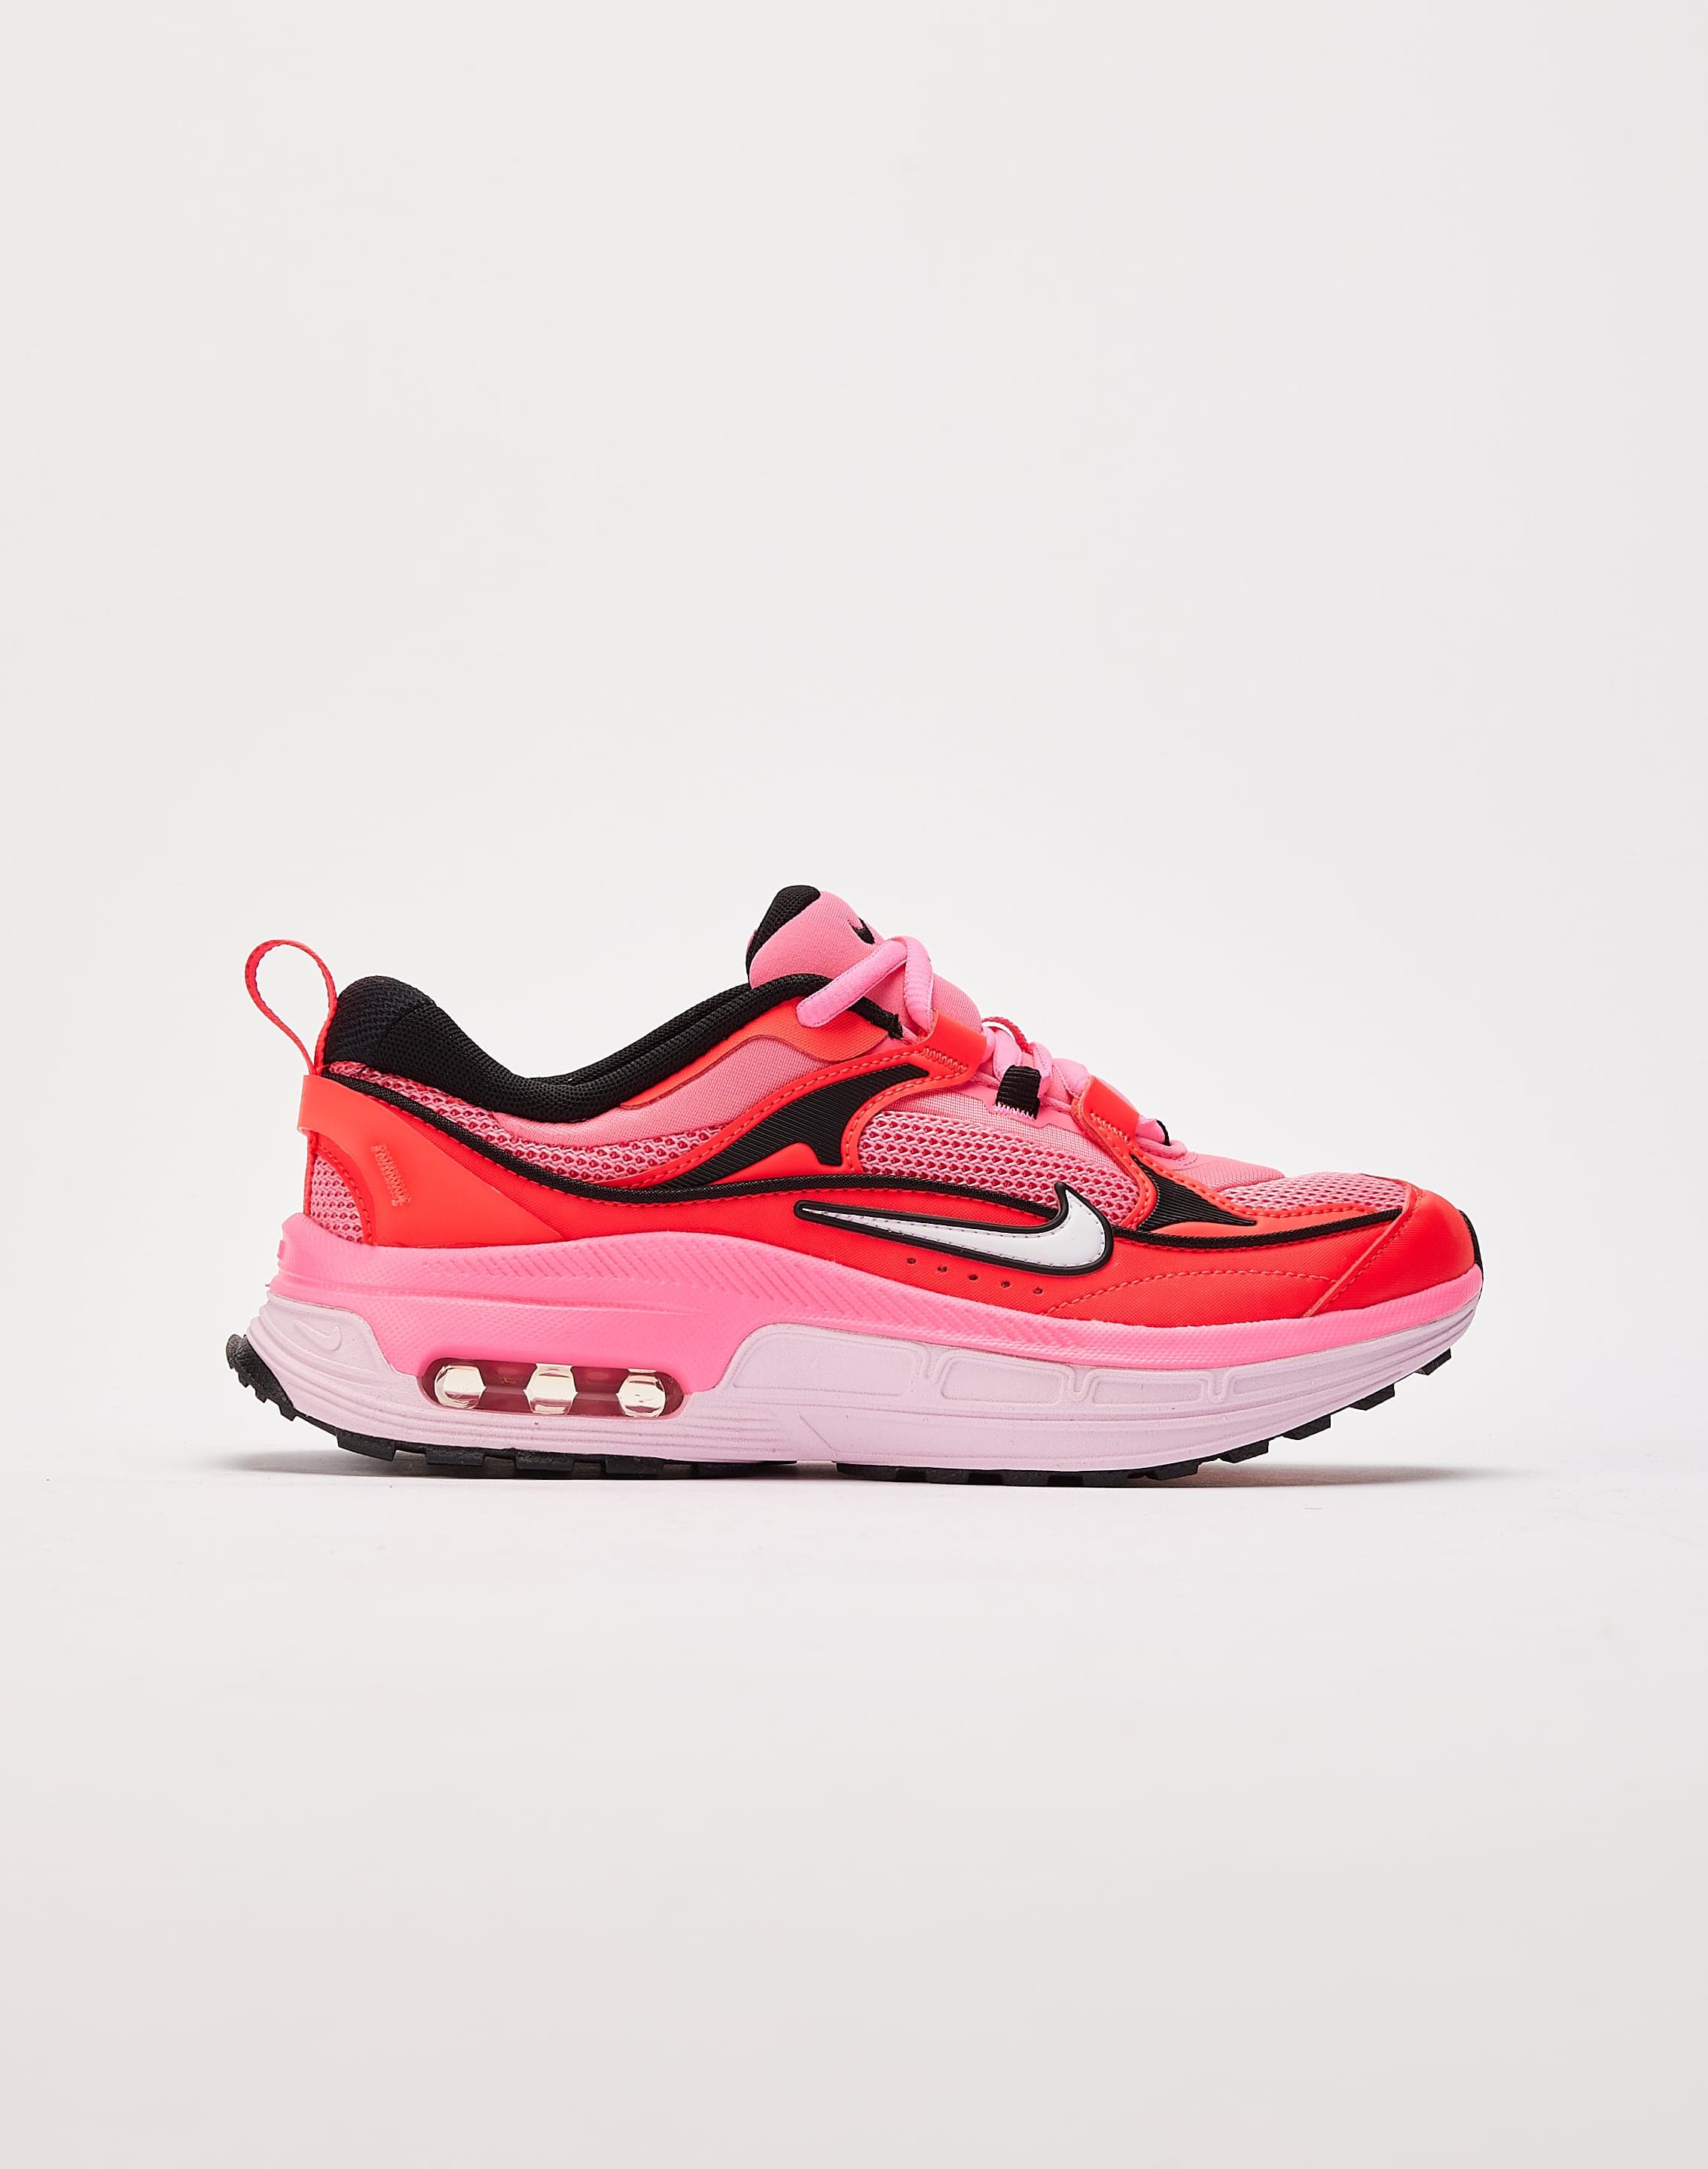 Nike Air Max Bliss – DTLR